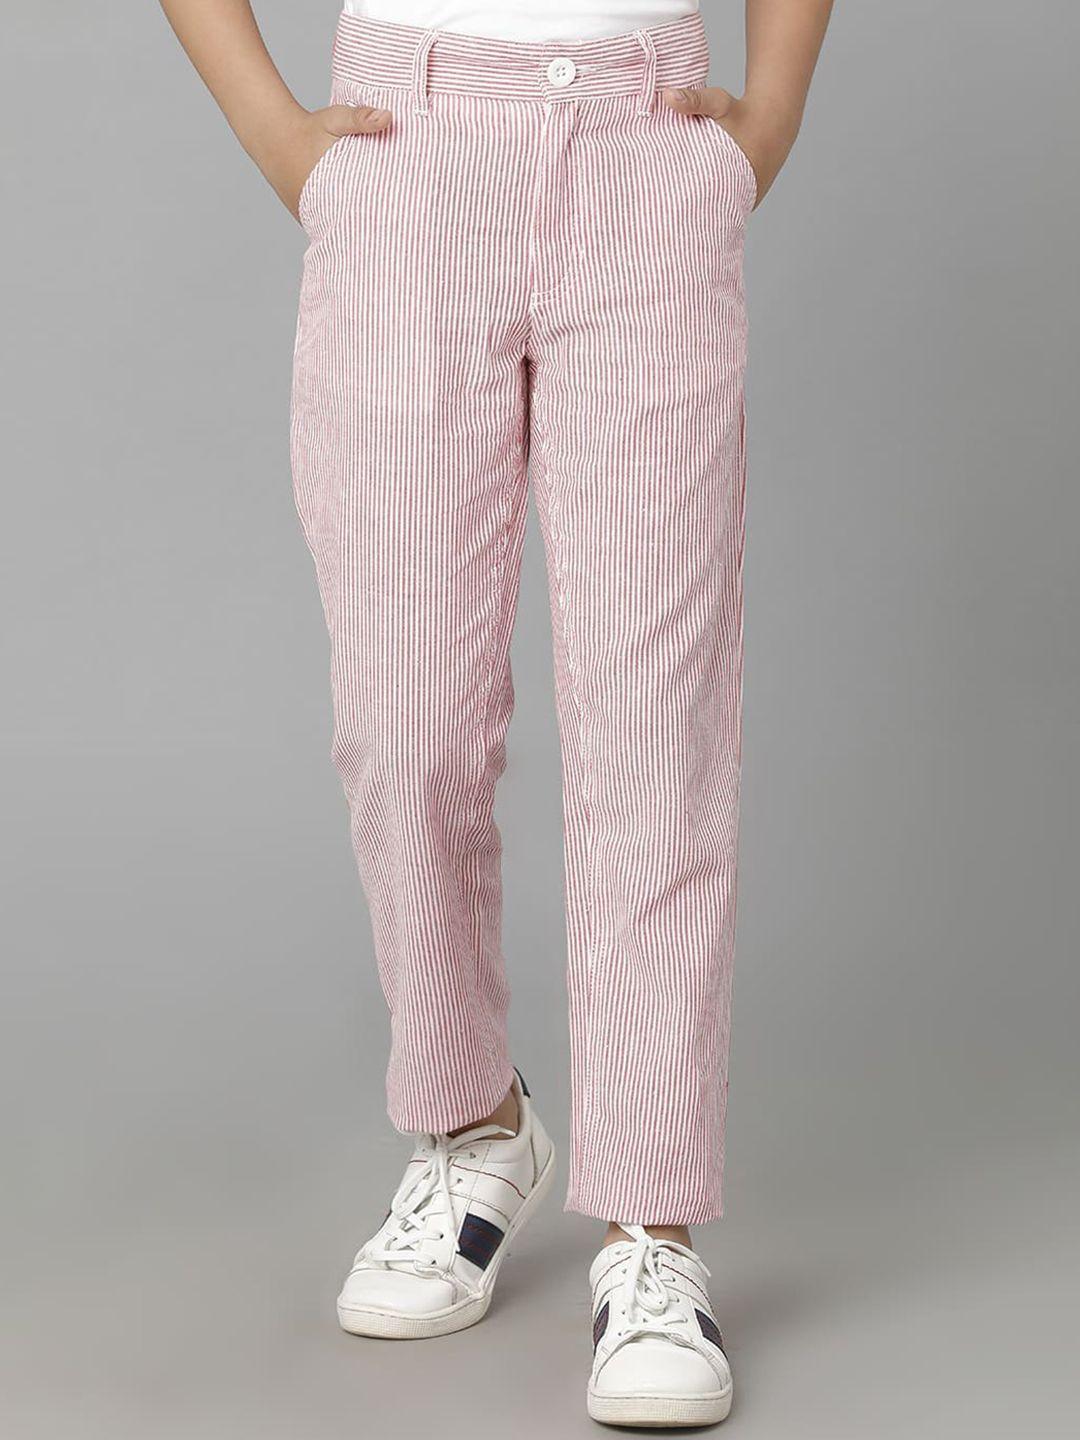 under-fourteen-only-boys-striped-cotton-trousers